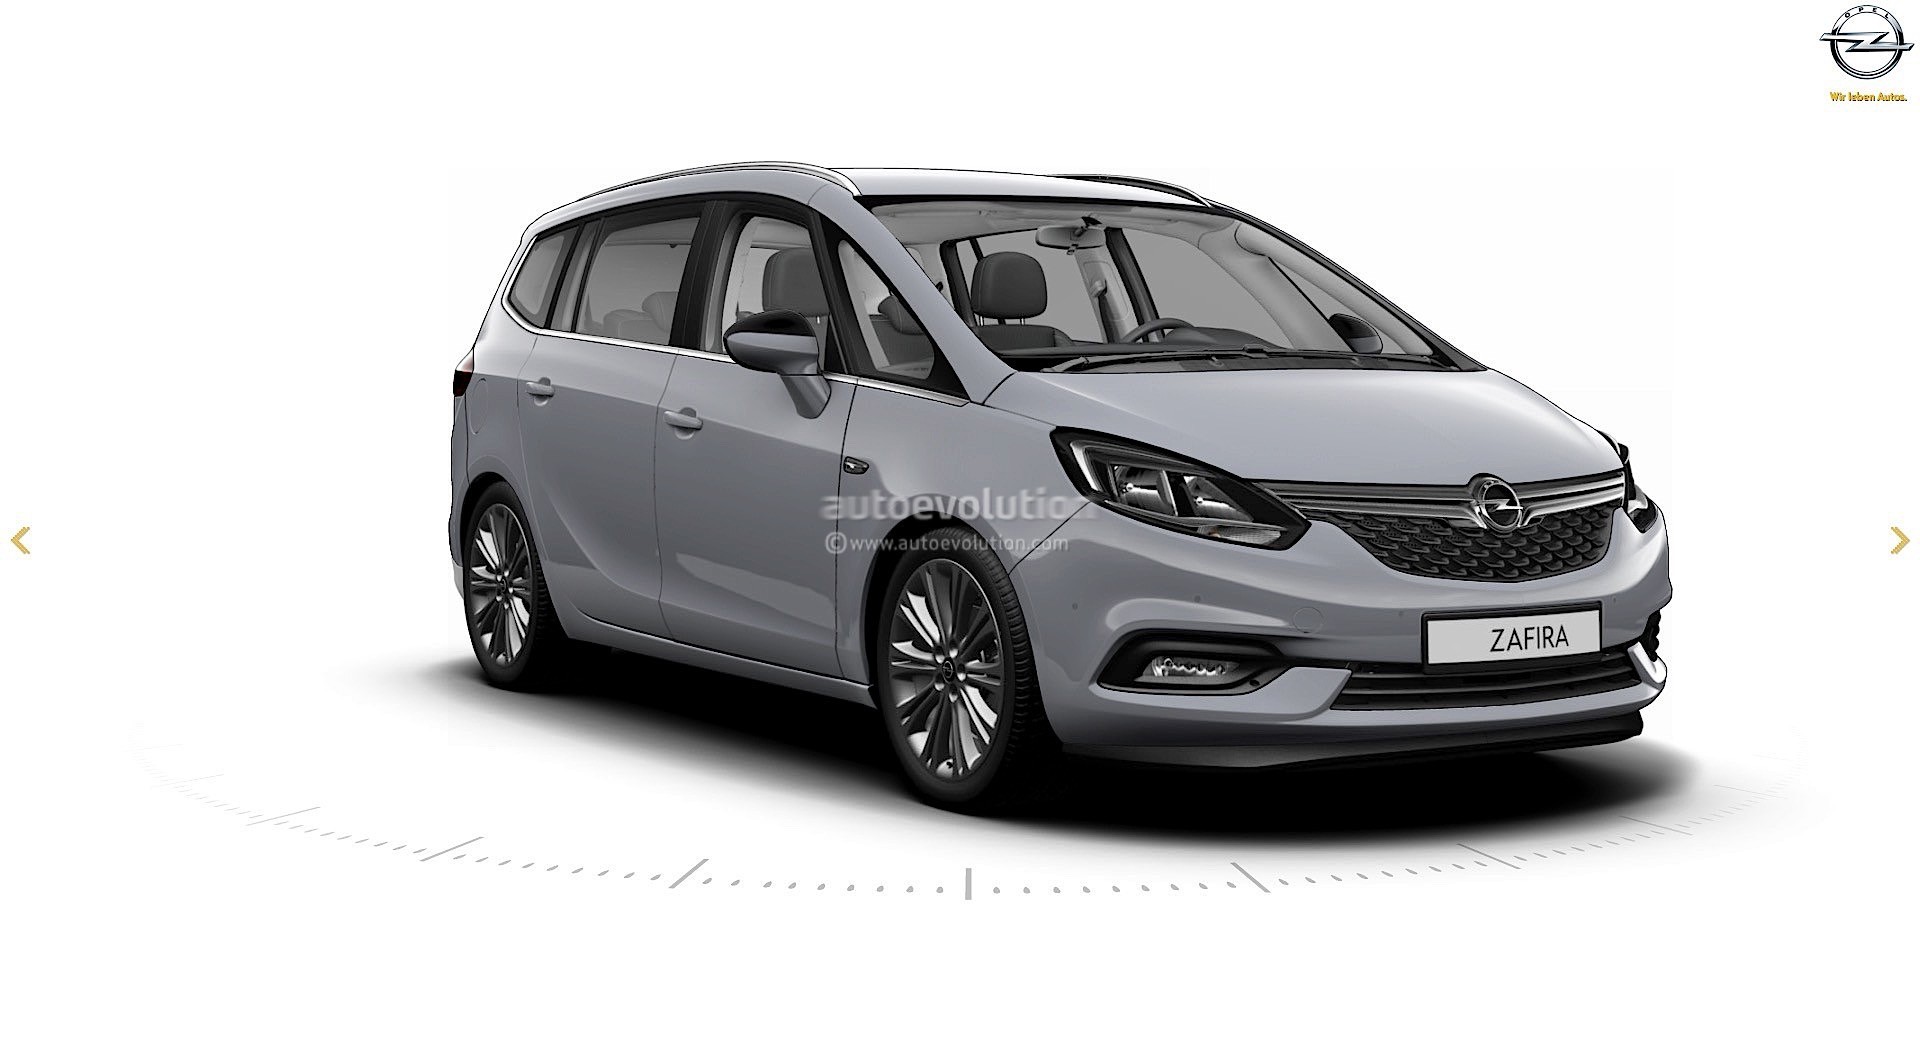 2017-opel-zafira-facelift-leaked-on-gm-website-here-are-the-first-pics_6-autonovosti.me-5